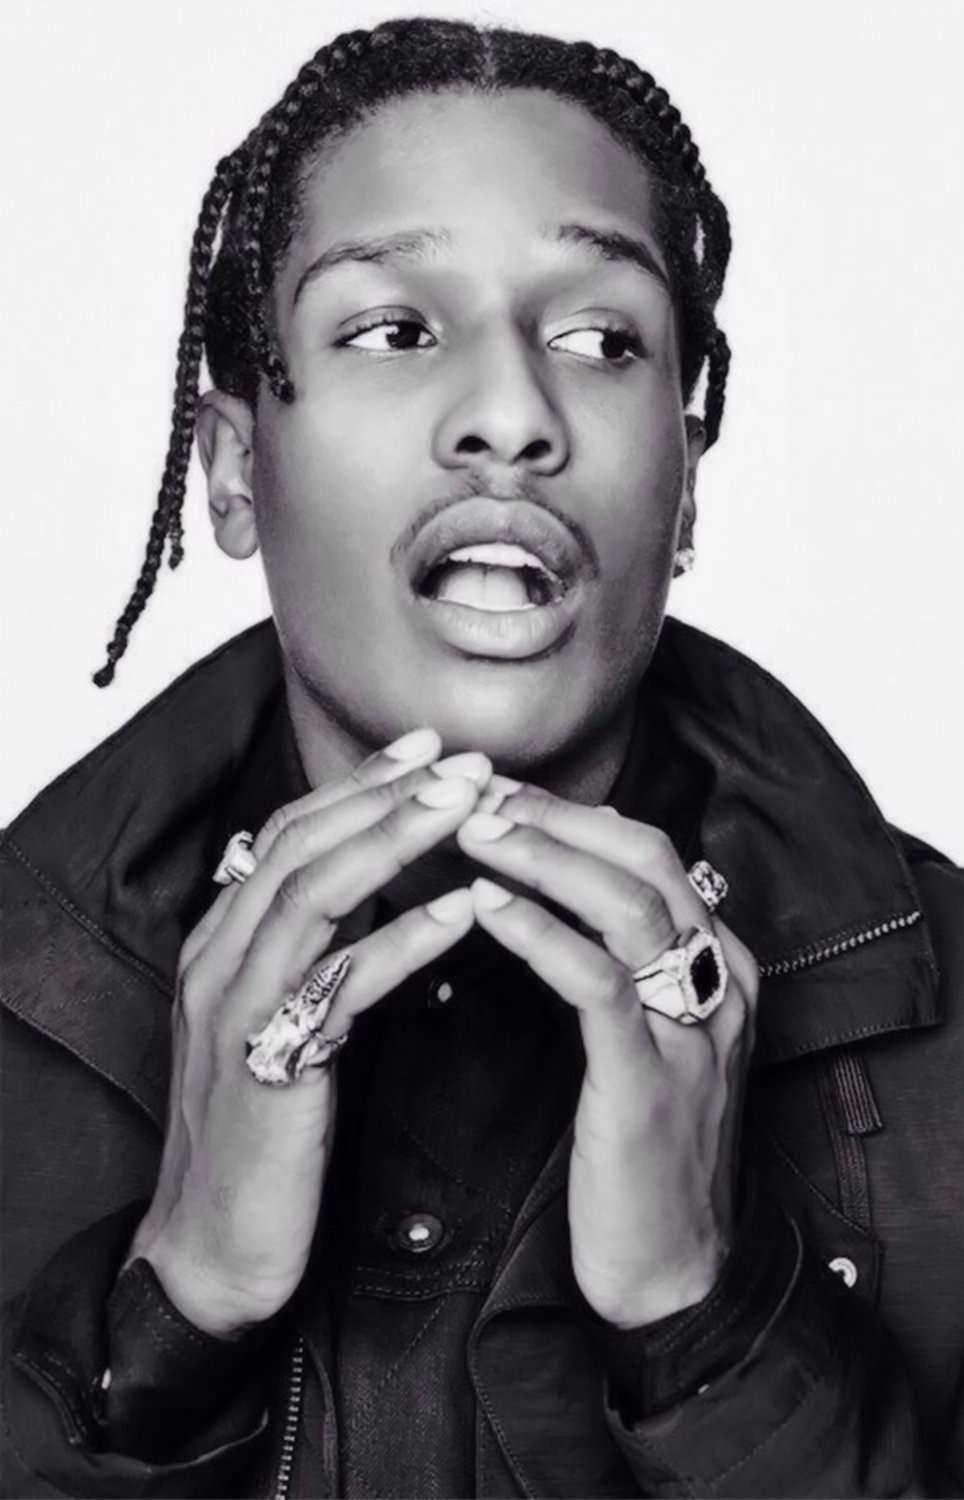 ASAP Rocky 13x19 inches Poster Print